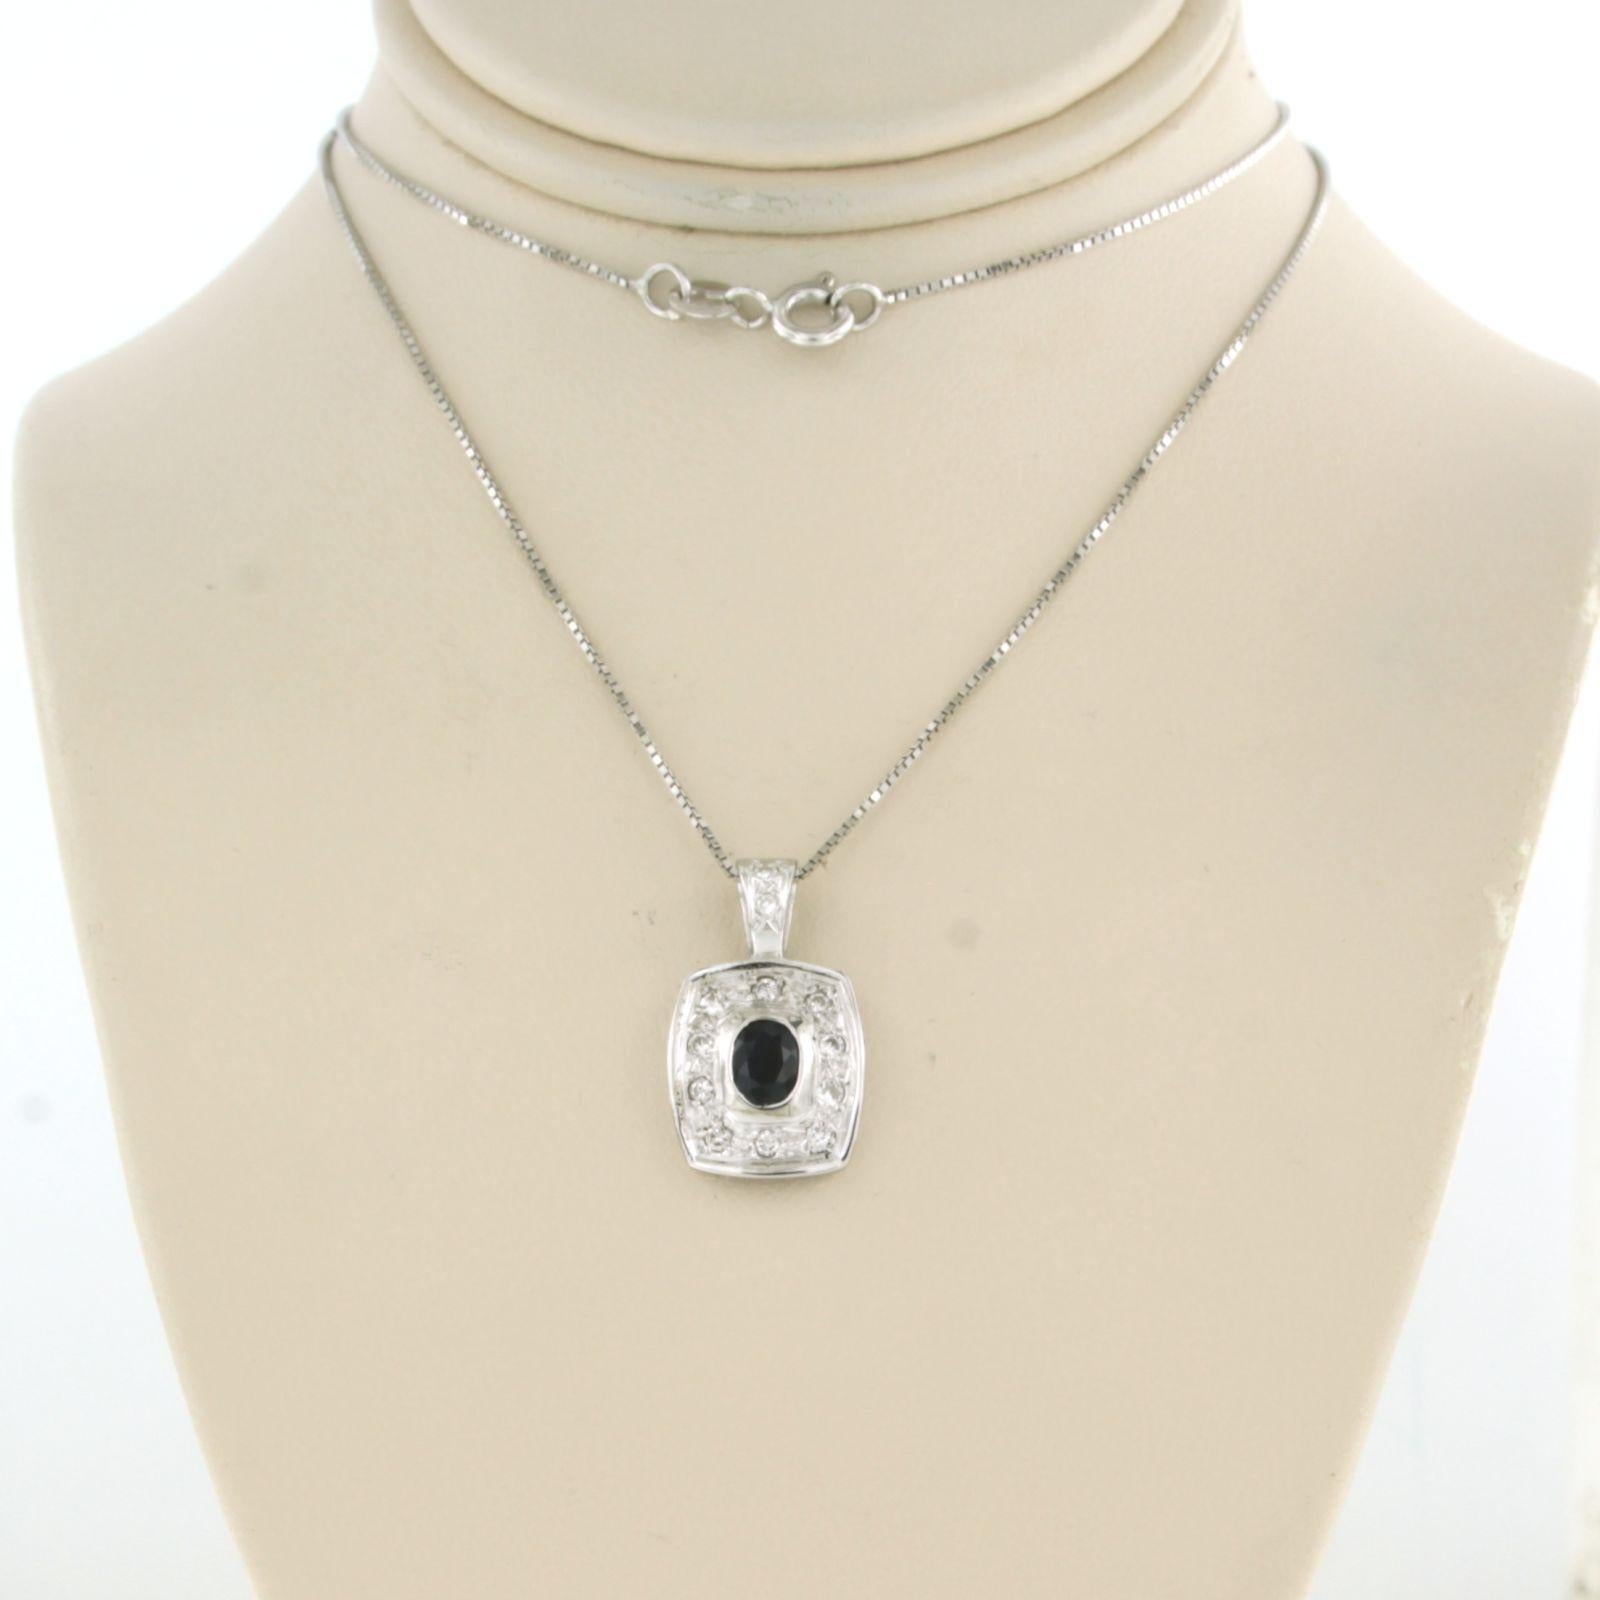 18k white gold necklace and pendant set with sapphire and brilliant cut diamonds. 0.24ct - F/G - SI - 45 cm long

detailed description:

necklace is 45 cm long and 0.7 mm wide

size of the pendant is approximately 1.9 cm long by 1.1 cm wide

total